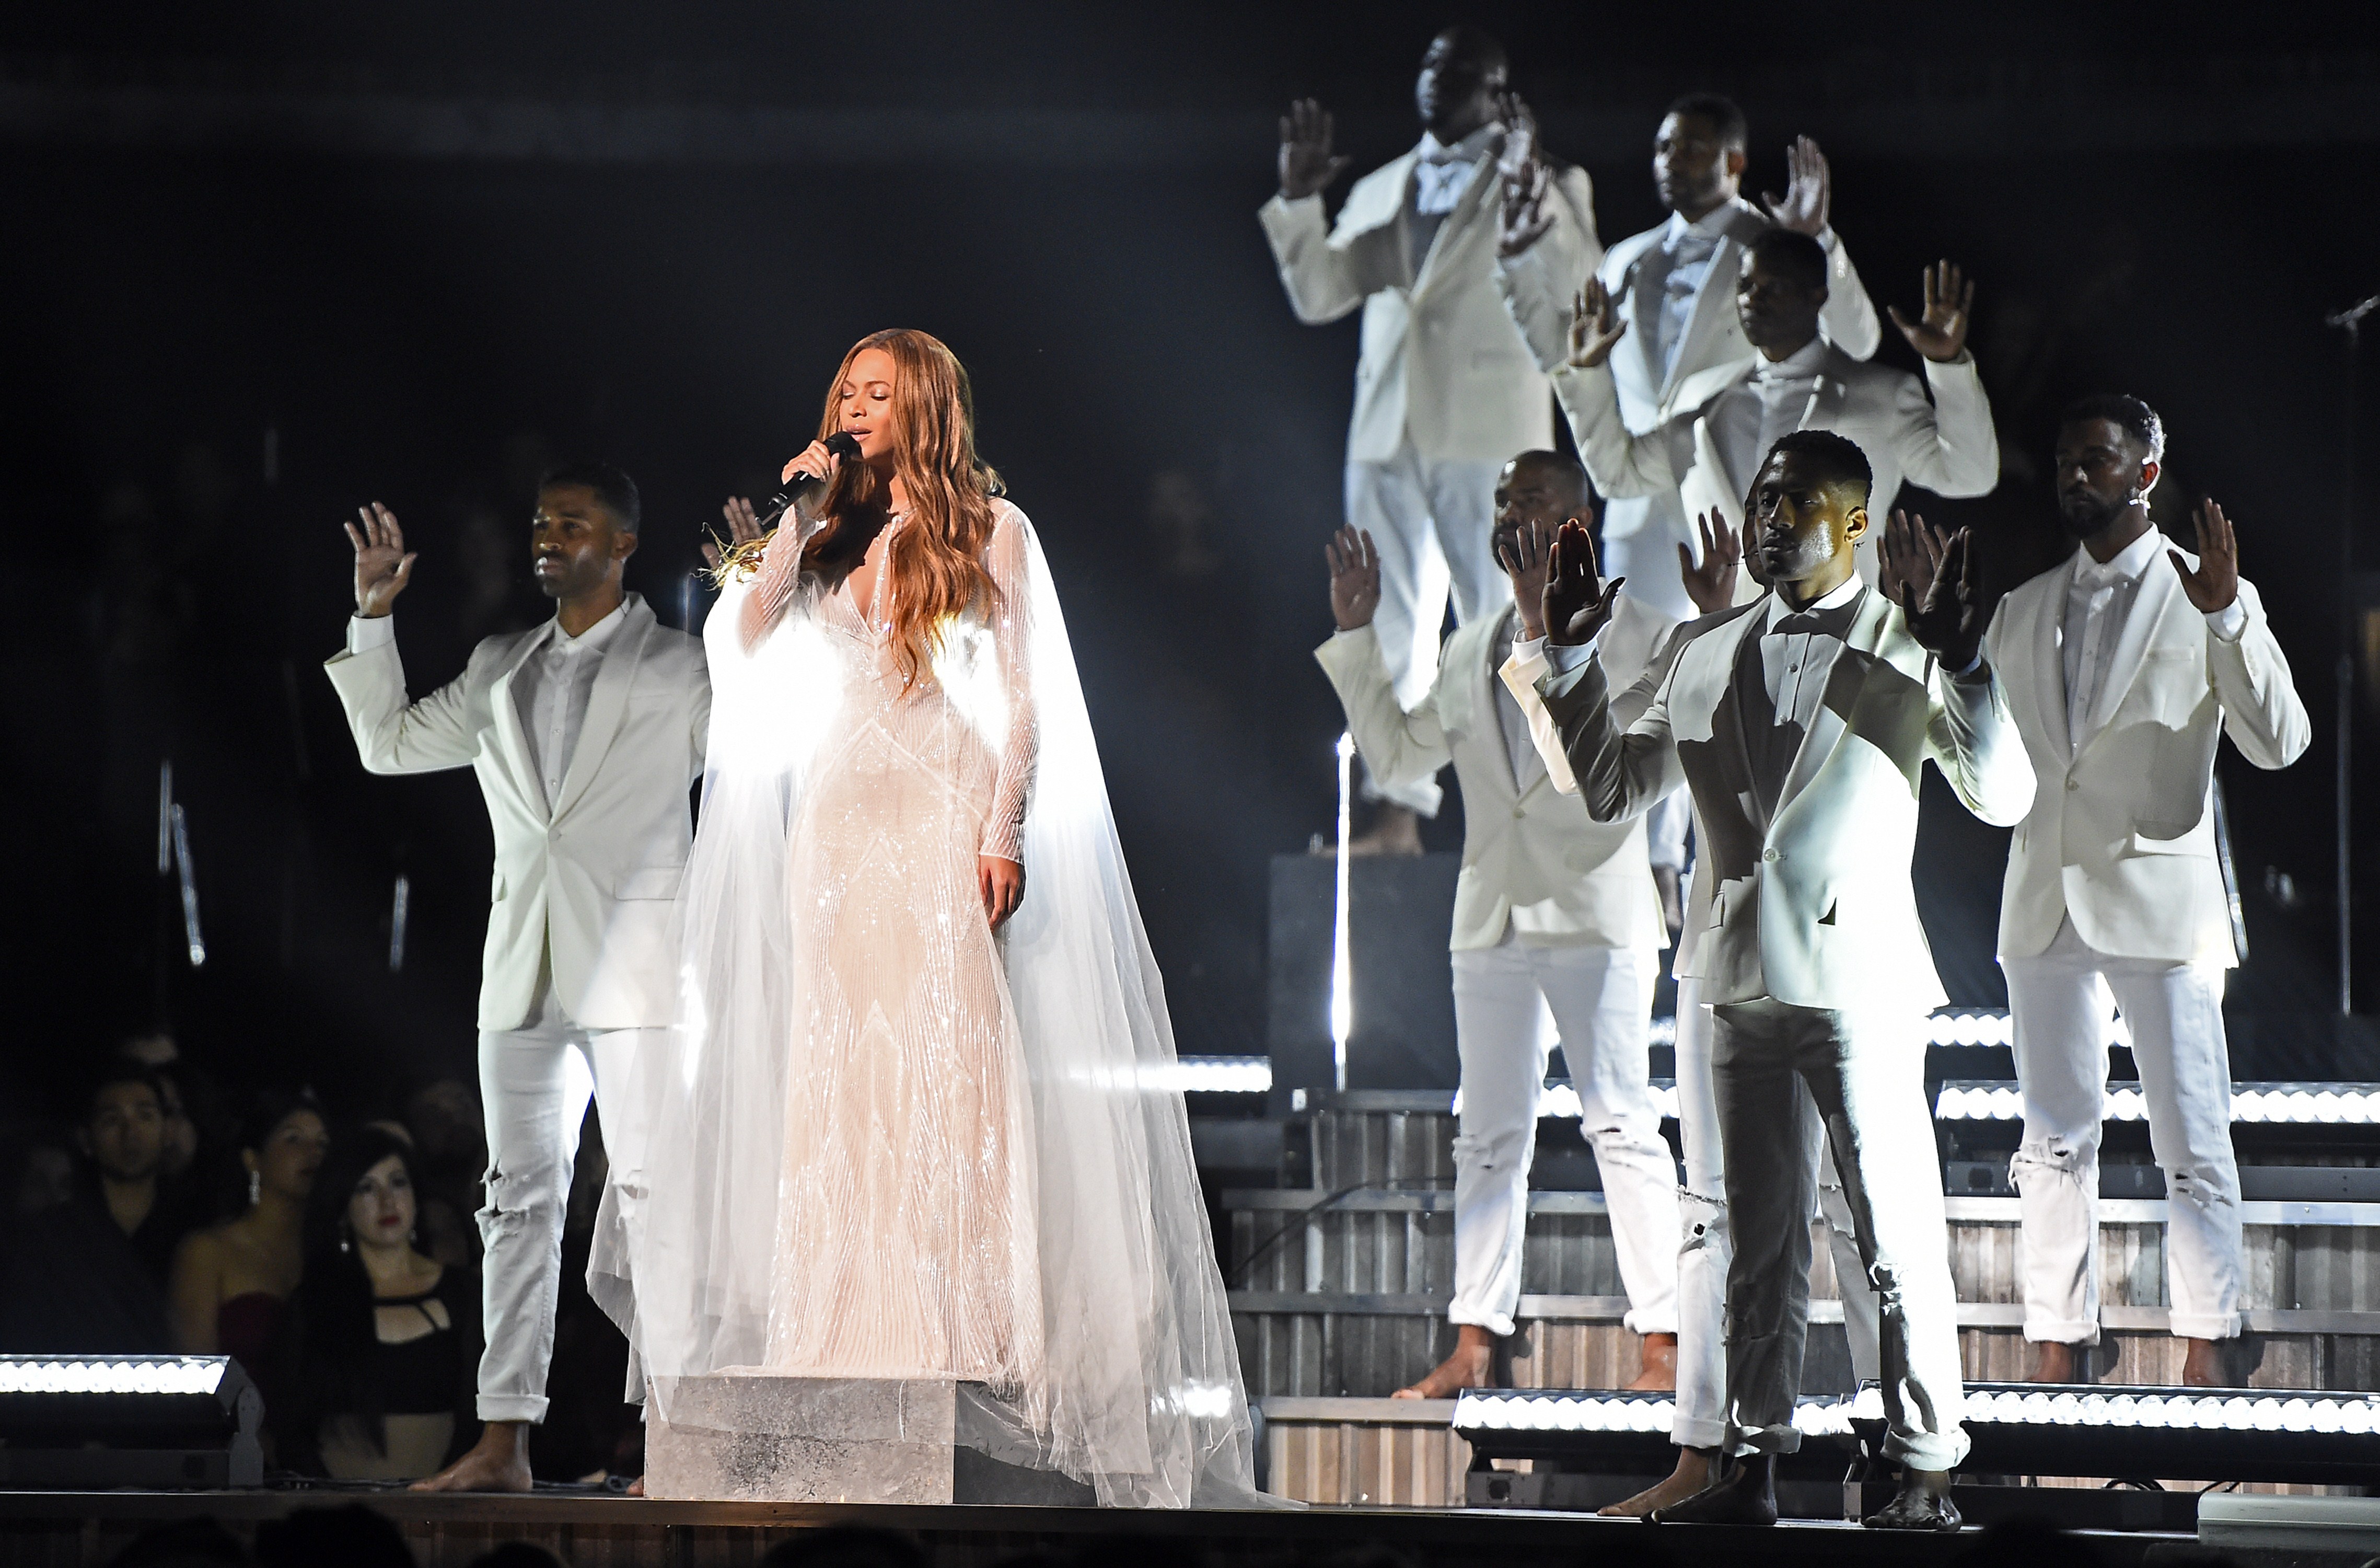 Beyonce performs at the Grammy awards